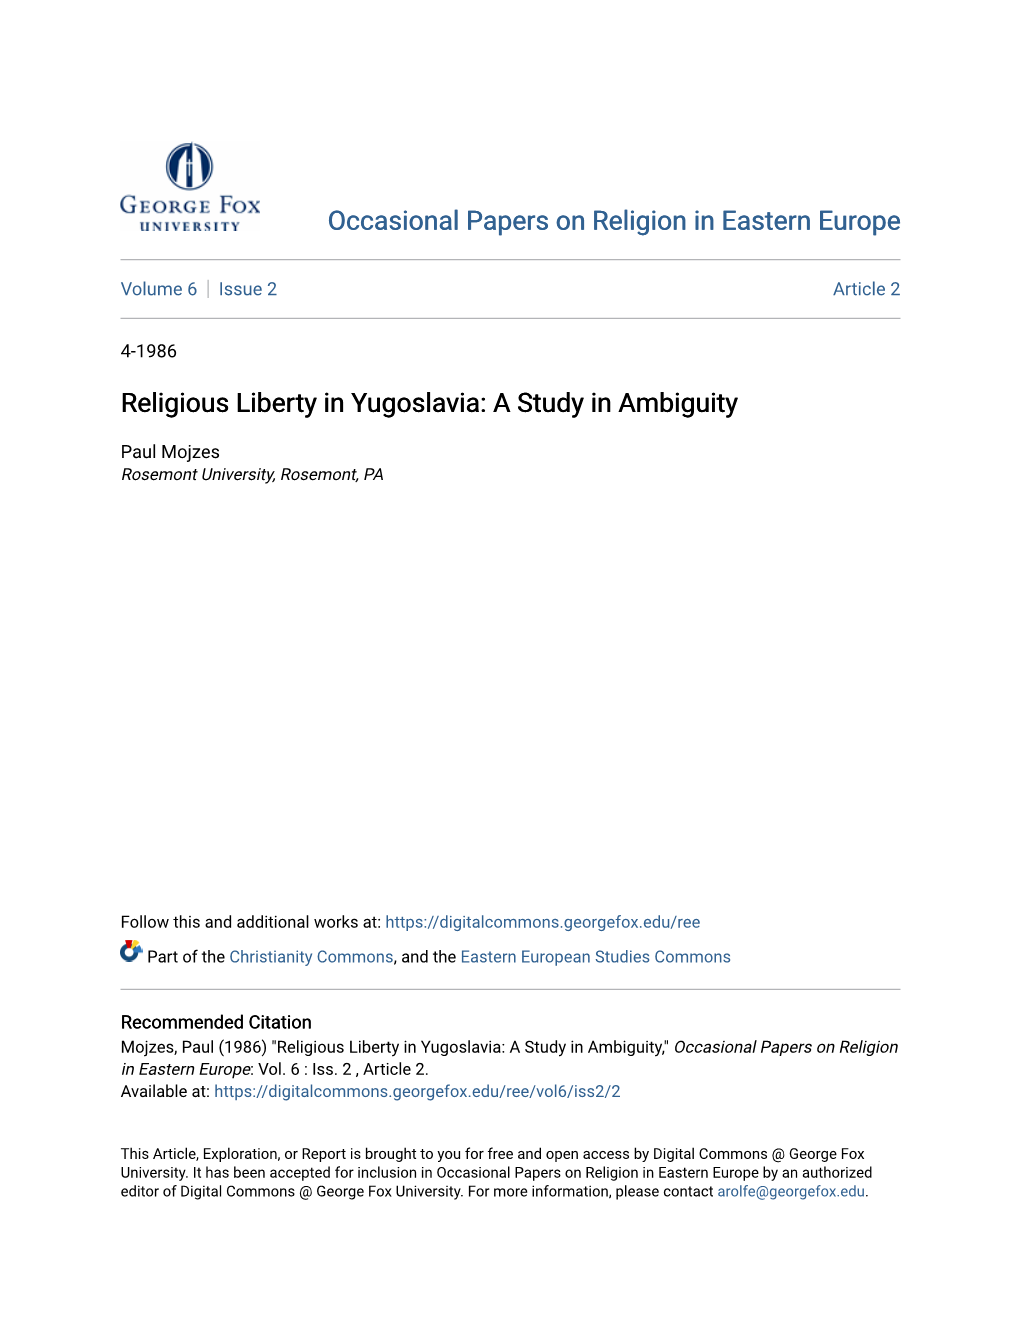 Religious Liberty in Yugoslavia: a Study in Ambiguity